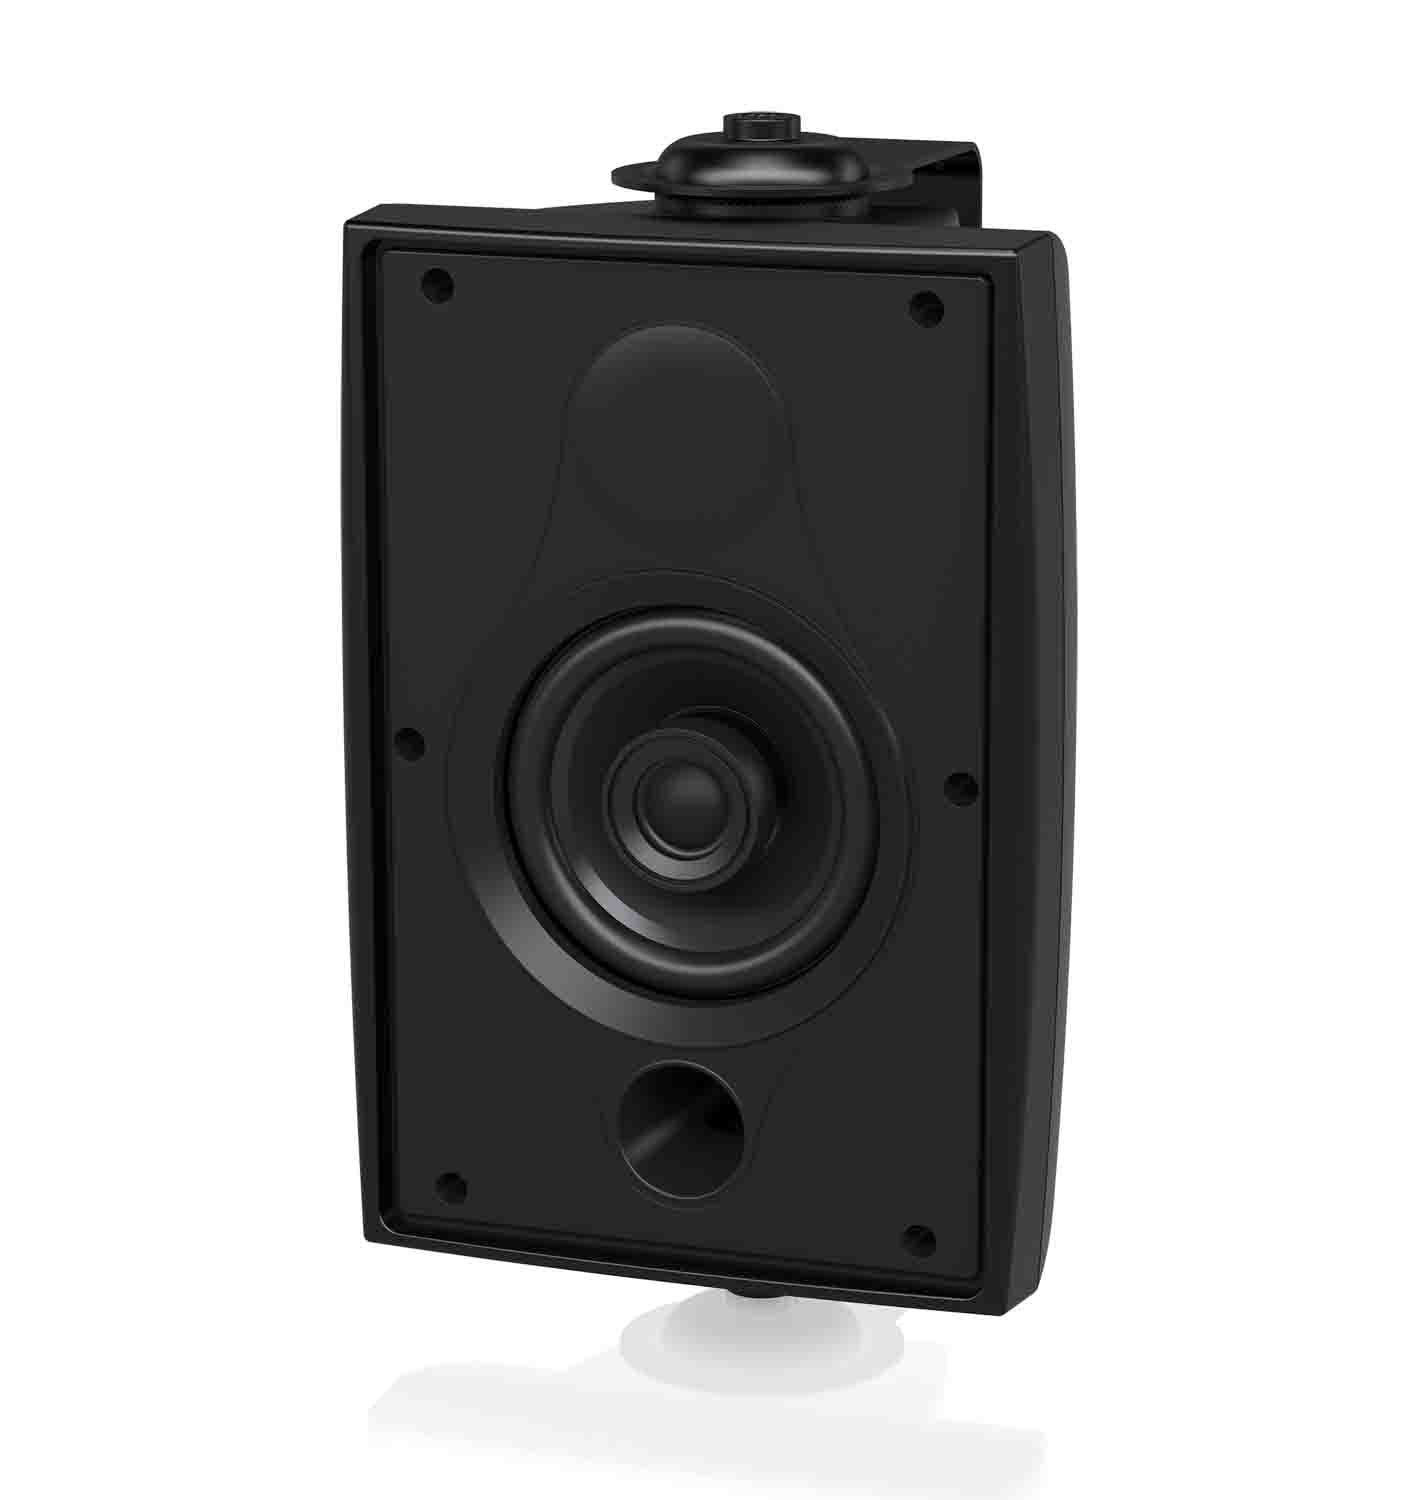 Tannoy DVS 4T (EN 54), 4-Inch Coaxial Surface-Mount Loudspeaker with Transformer for Installation Applications - Hollywood DJ